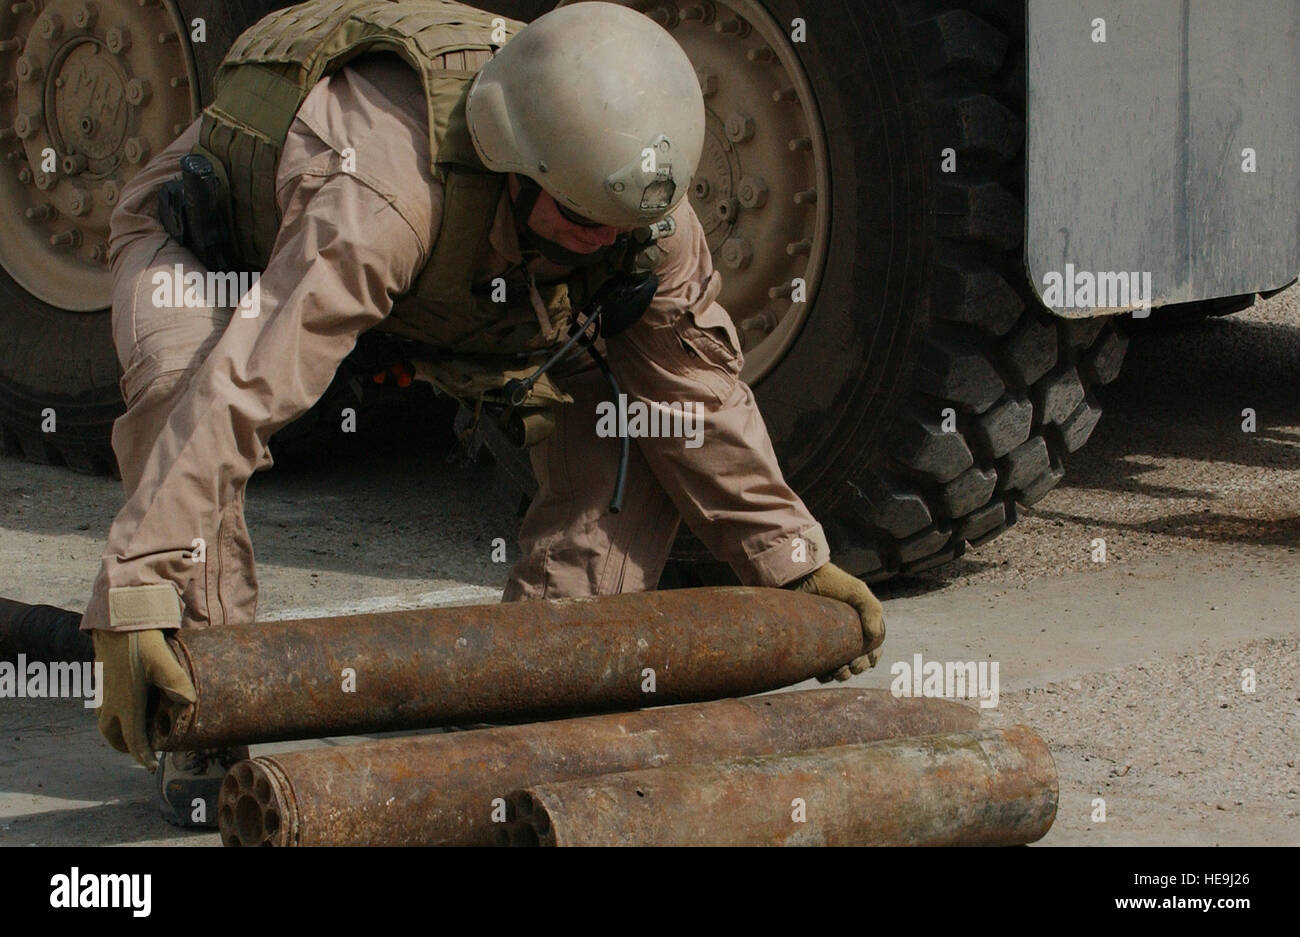 U.S. Navy Explosive Ordnance Technician 1st Class Donnie Walkey loads 107 mm rockets into the team vehicle at the Iraqi police headquarters in Ad Diwaniyah, Iraq, Oct. 30, 2006, for transport to Camp Echo, Iraq.  The U.S. Navy EOD Mobile Unit 3 responded to the Iraqi police headquarters to recover a cache of explosives found by policemen during a checkpoint vehicle search.  Walkey is from the U.S. Navy Explosive Ordnance Disposal Mobile Unit 3 Team, Multinational Division - Central South  Tech. Sgt. Dawn M. Price) (Released) Stock Photo